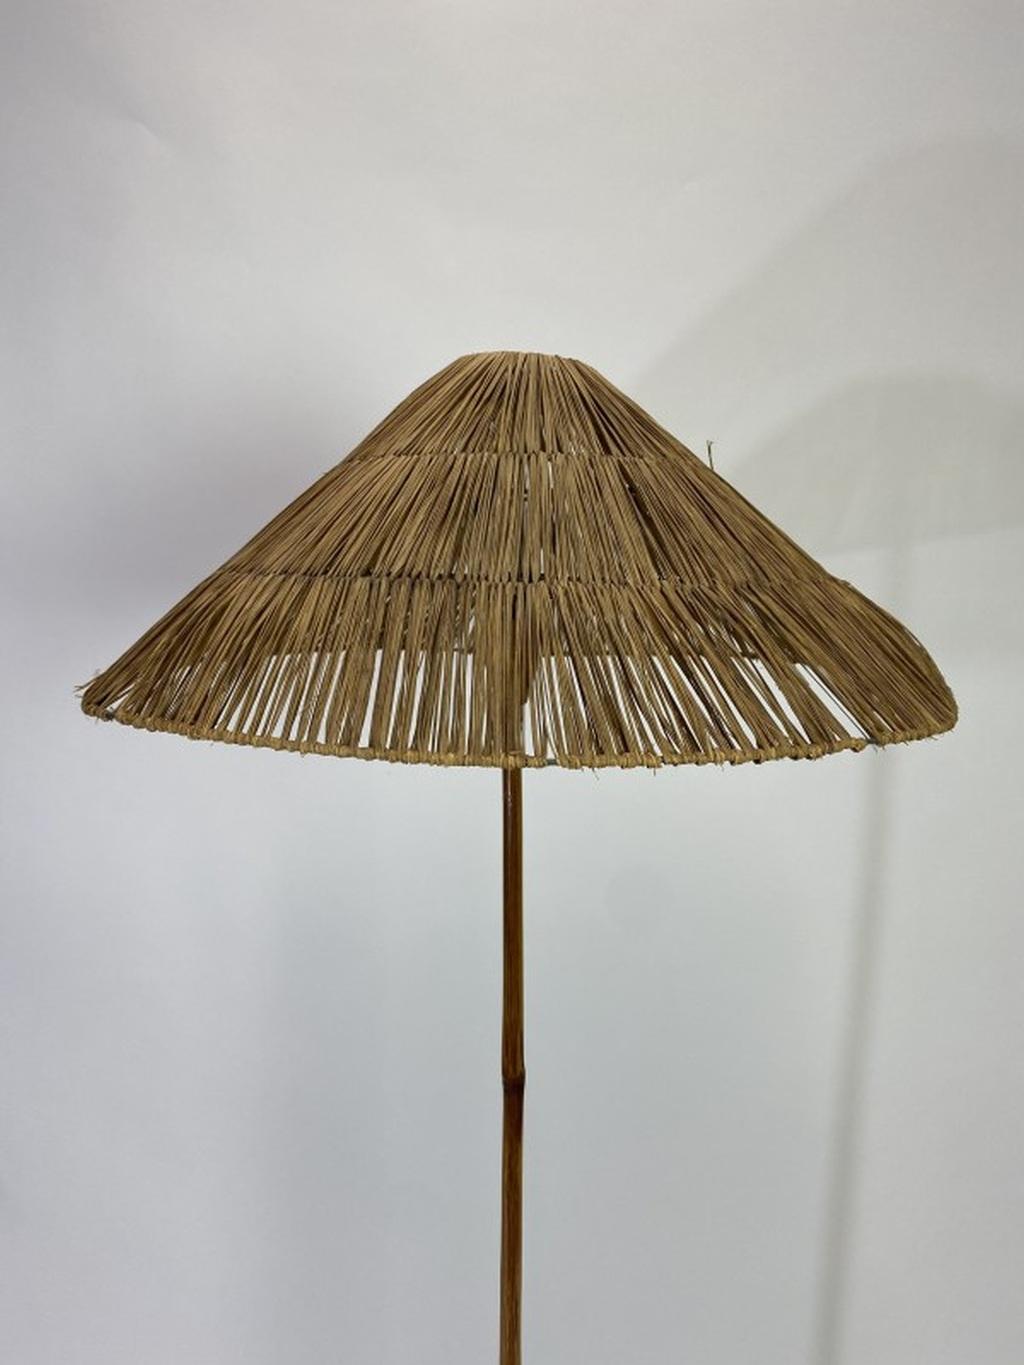 Bamboo floor lamp by Jozef Frank in very good original condition.